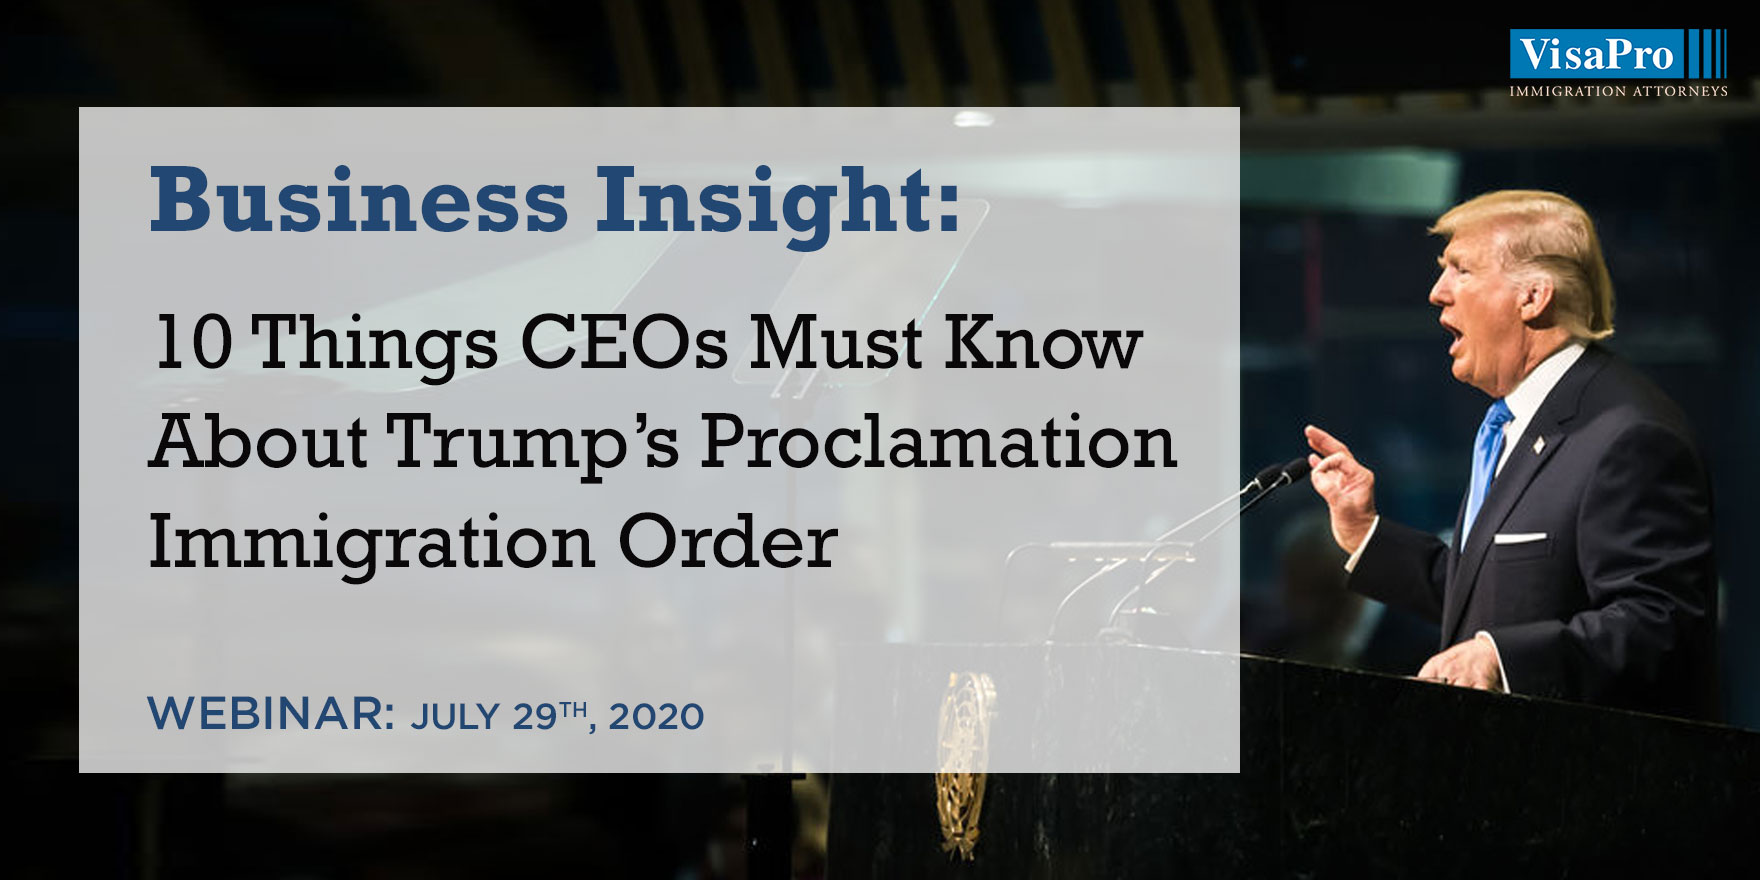 Business Insight: 10 Things CEOs Must Know About Trump’s Proclamation Immigration Order, Monterrey, Nuevo Leon, Mexico